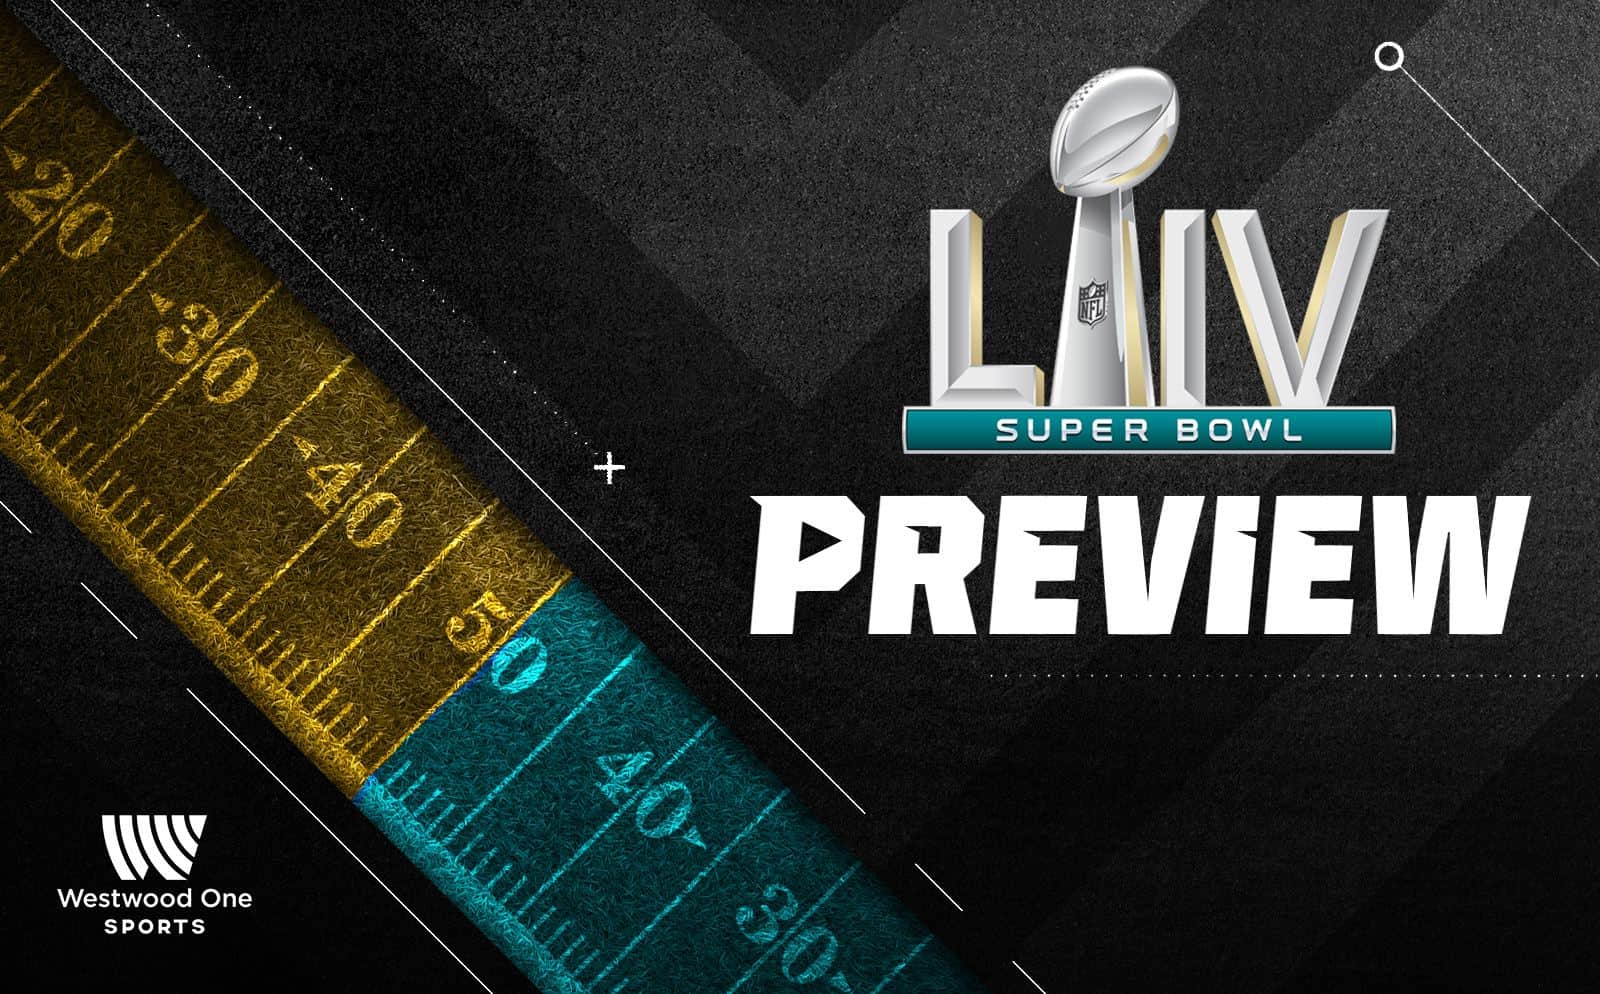 Super Bowl Preview Listen Here! — 02/02/2020